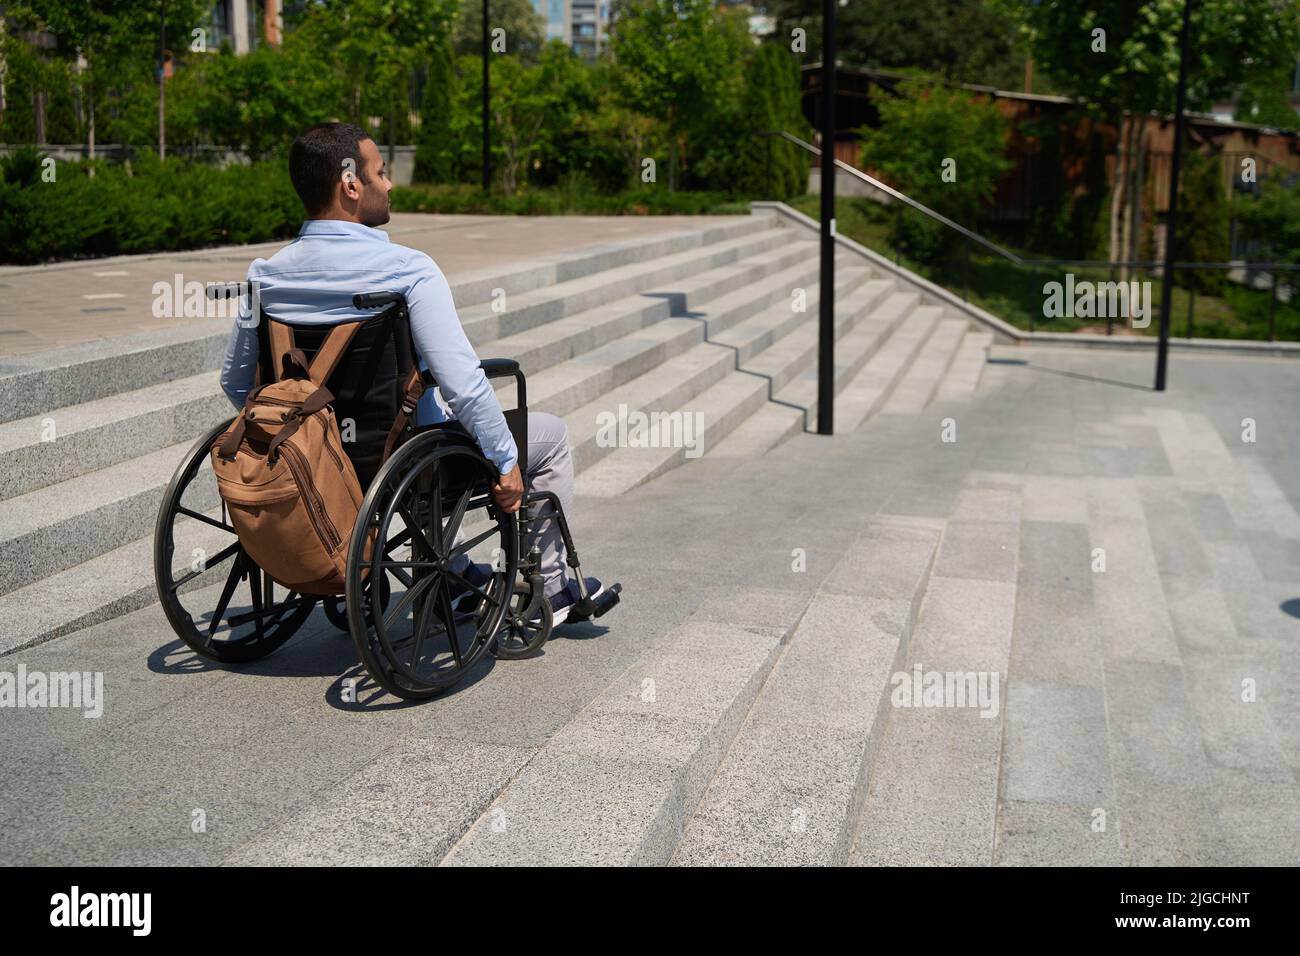 Man seated in manual wheel chair descending staircase Stock Photo